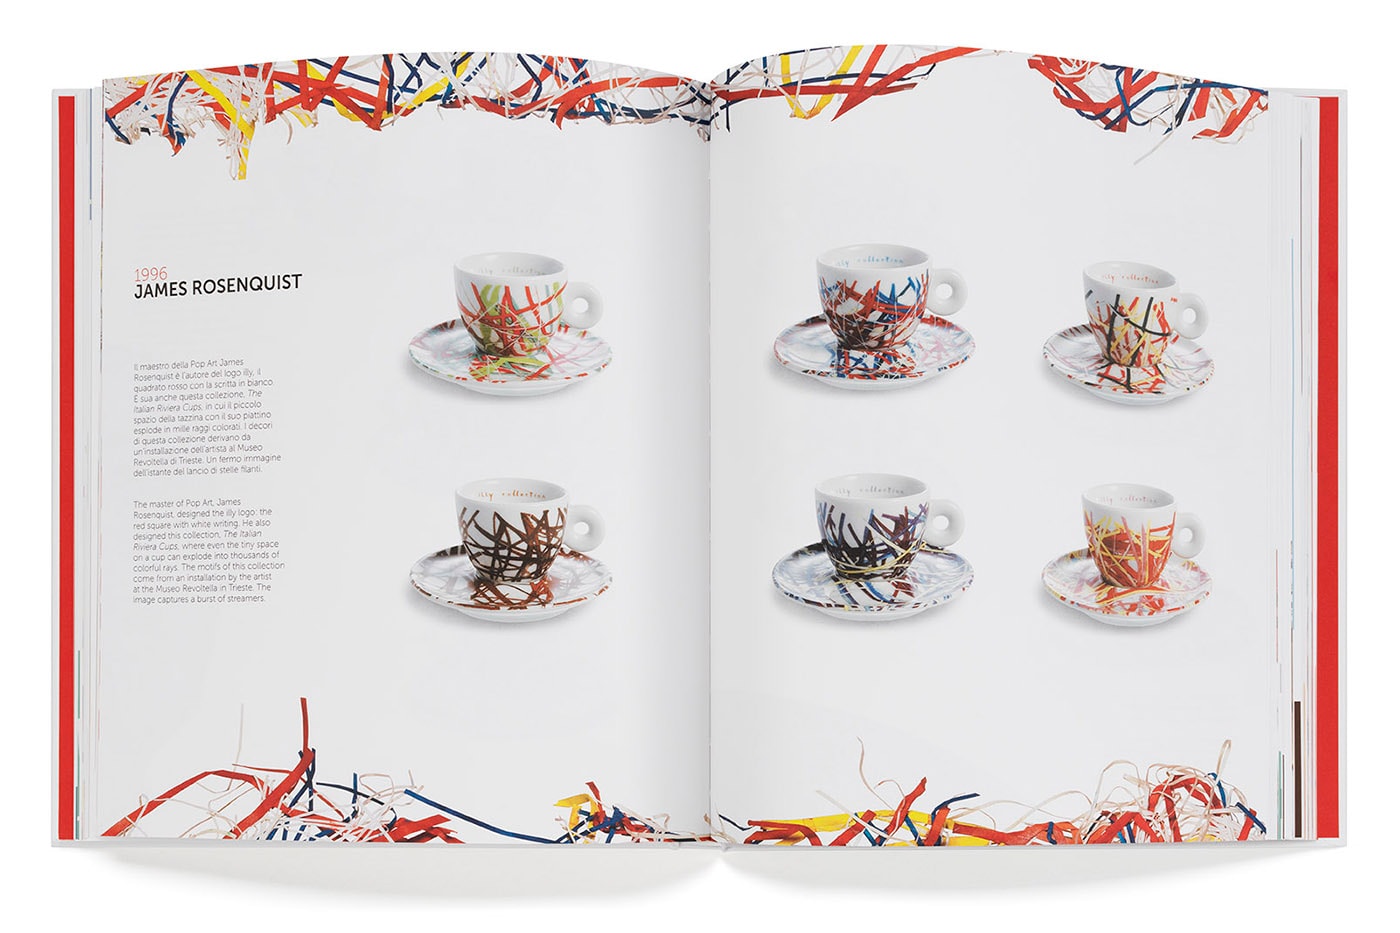 Illy Celebrates Three Decades of Collaborations in New Book